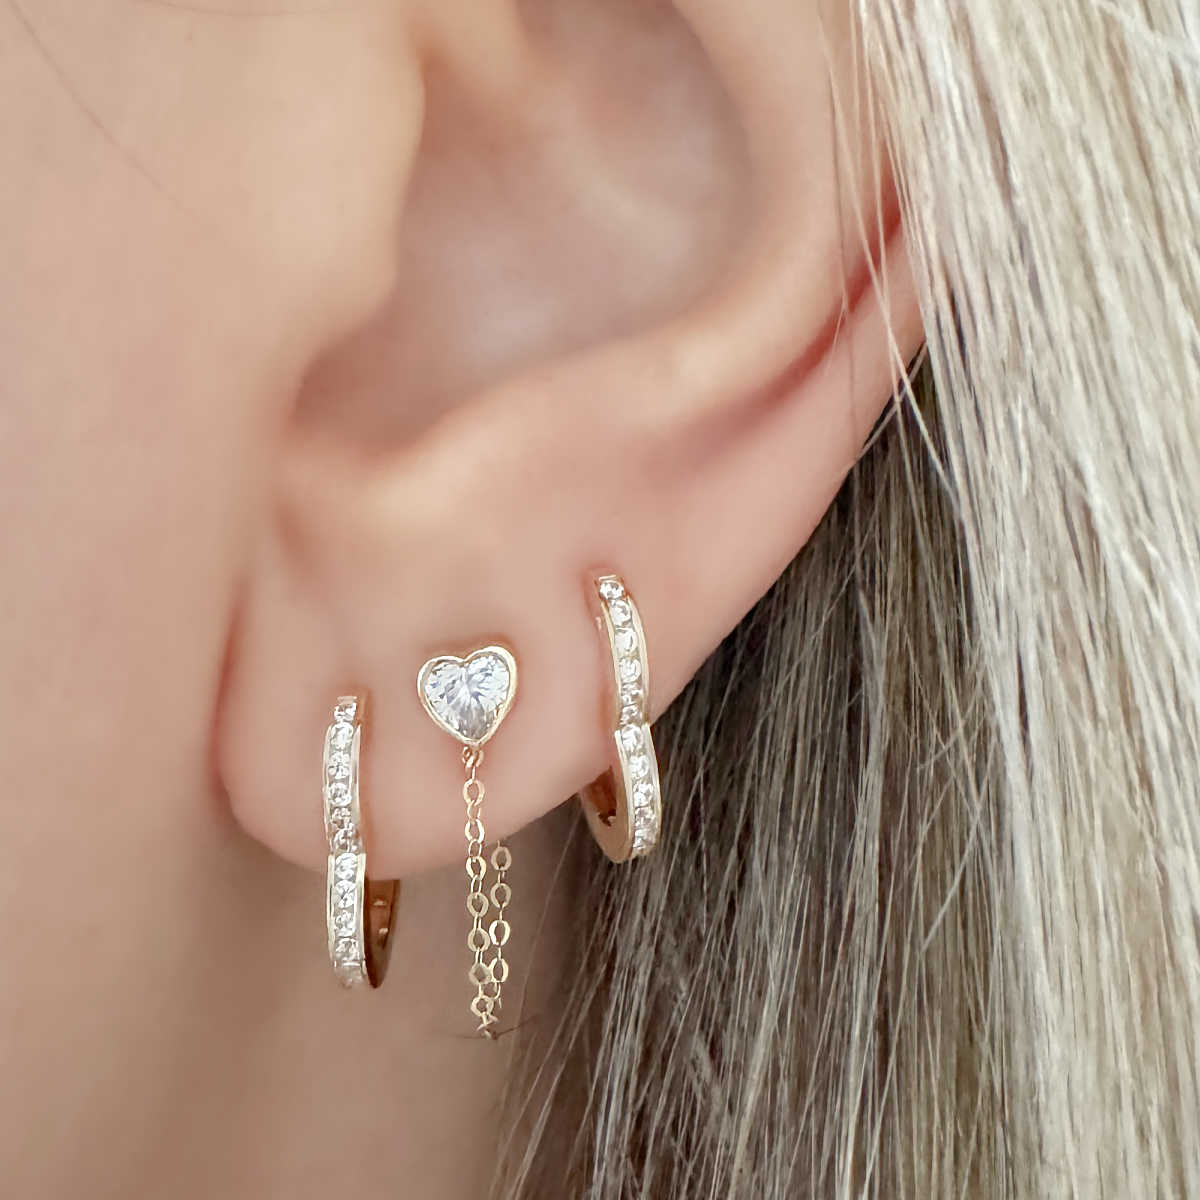 Heart Shaped Connector Stud | 14k Gold Helix Chain Earring on Model